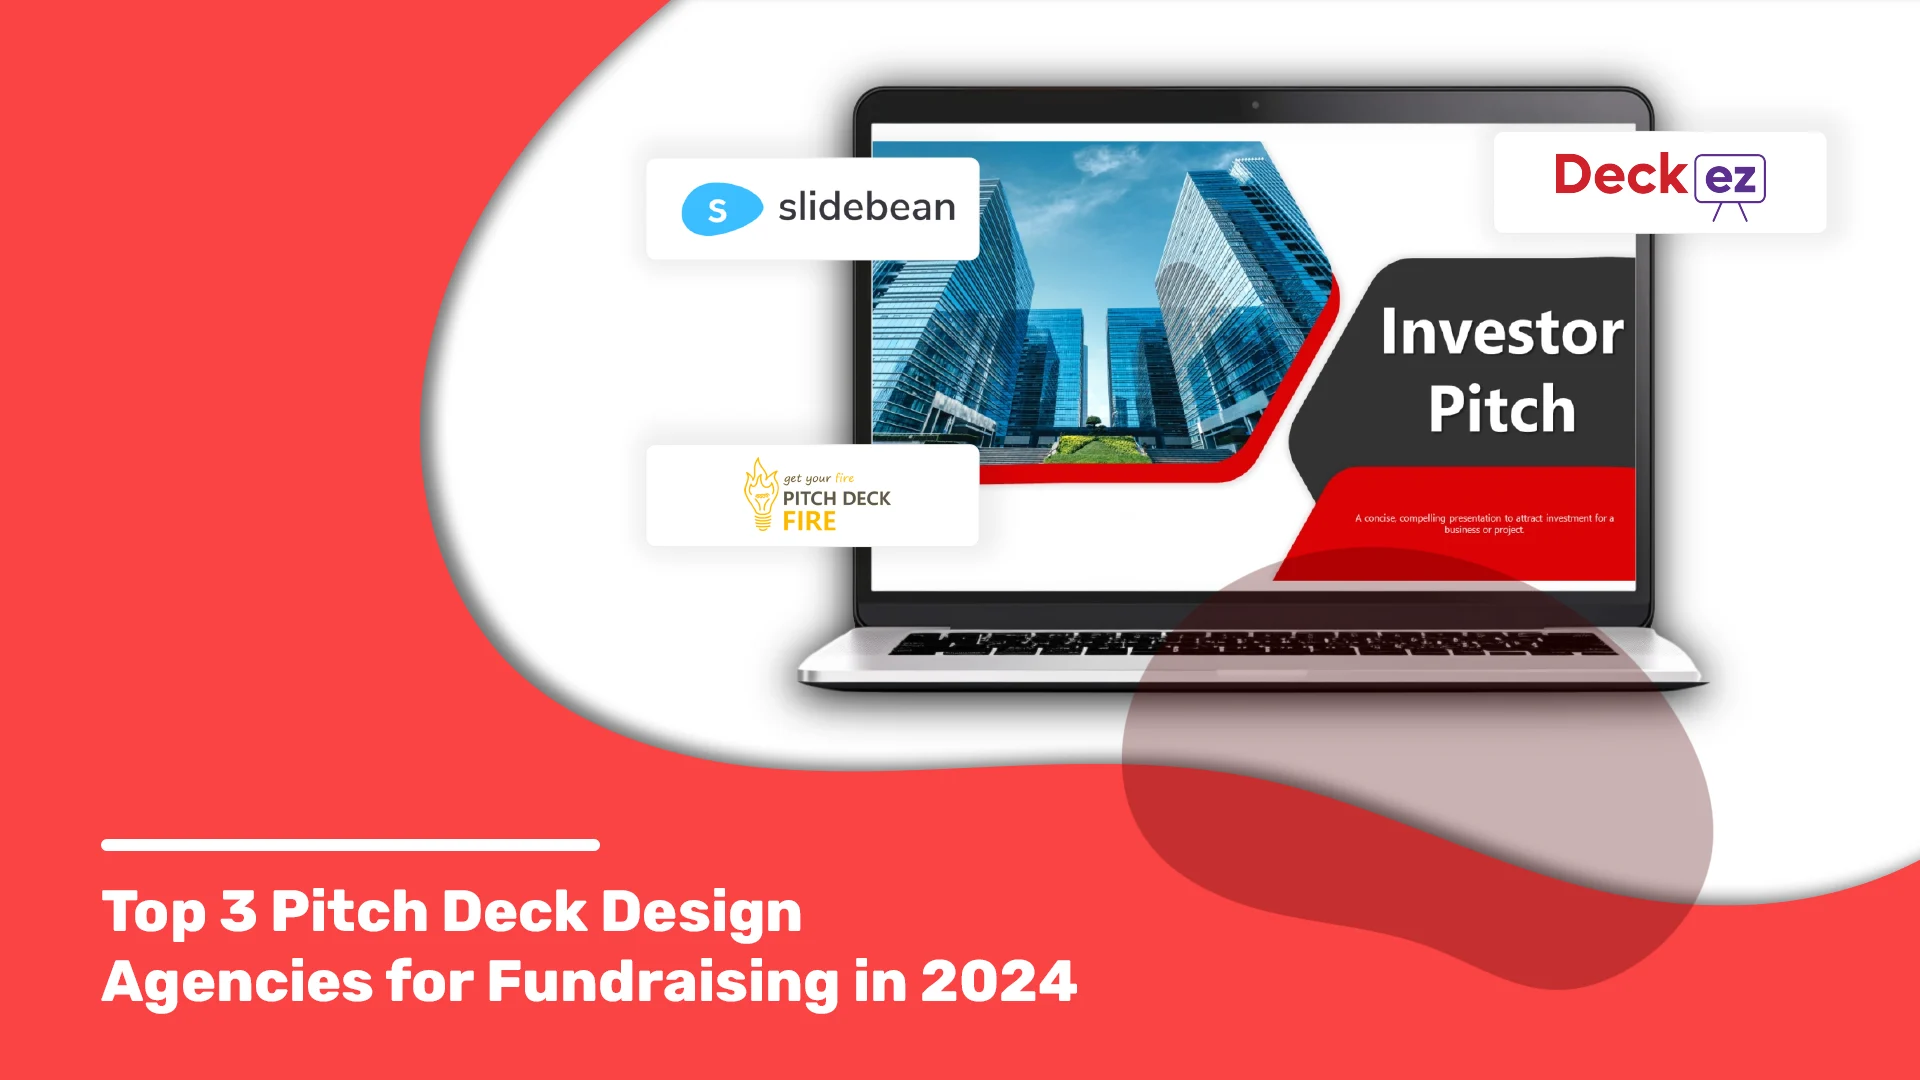 Top 3 Pitch Deck Design Agencies for Fundraising in 2024